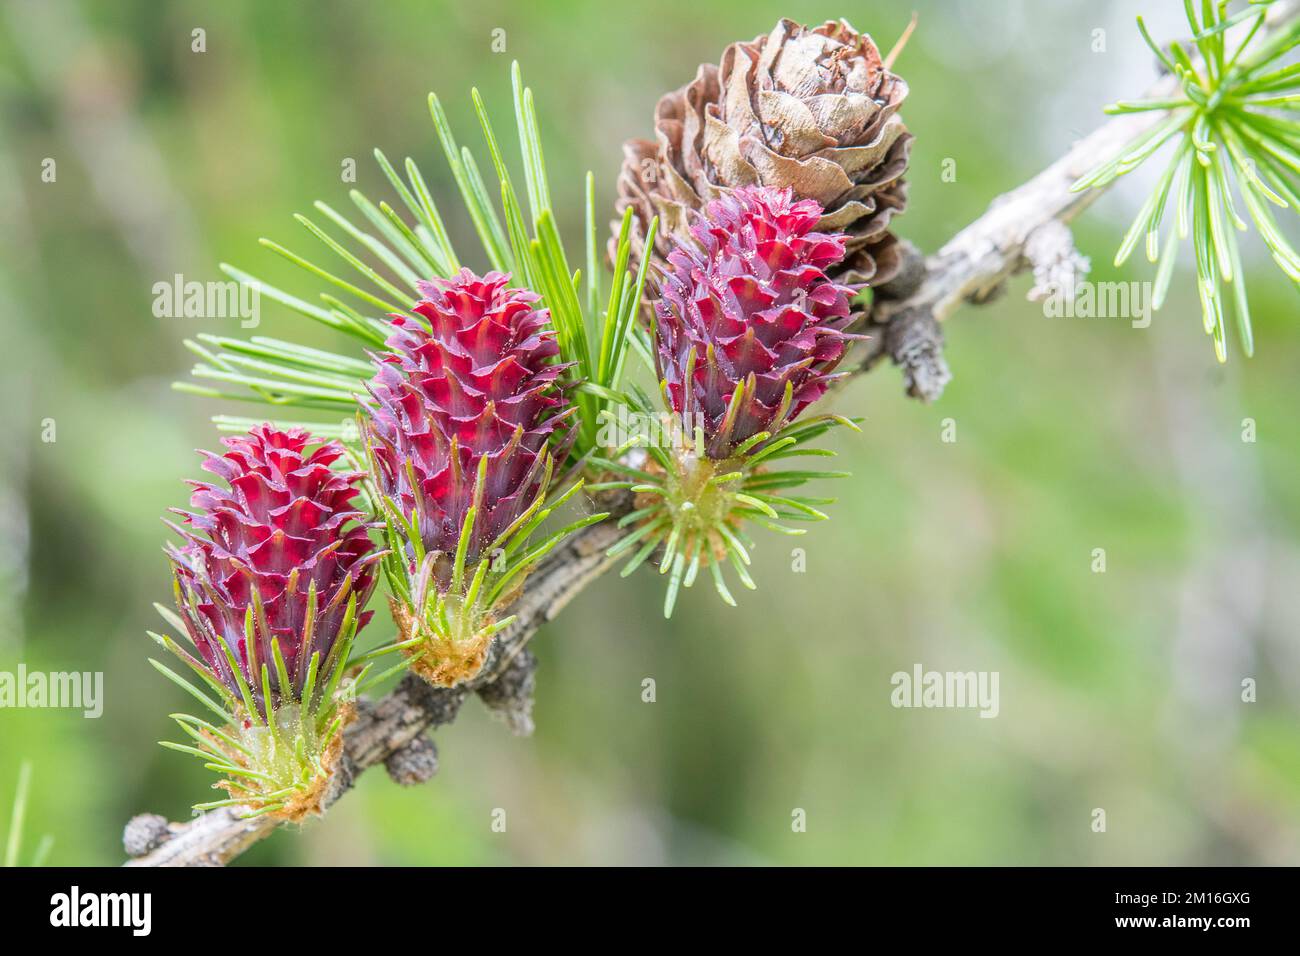 Larix decidua, the European larch, is a species of larch native to the mountains of central Europe, female flower and cone. Stock Photo